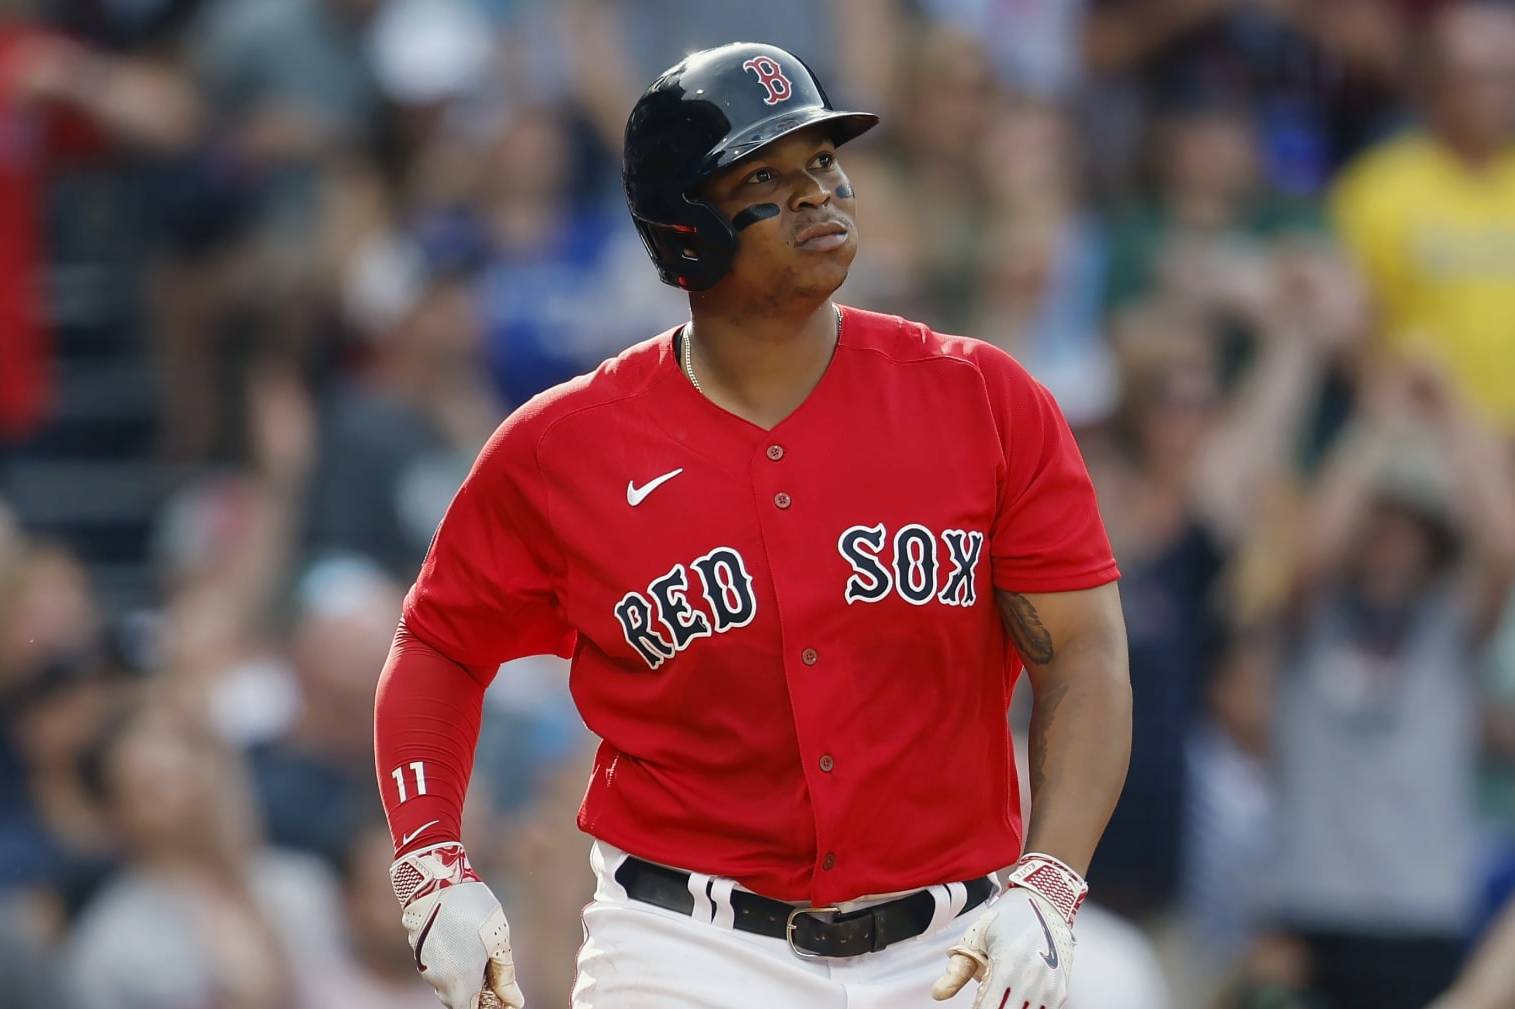 Red-hot Red Sox improve to 14-4 in June with win over Tigers